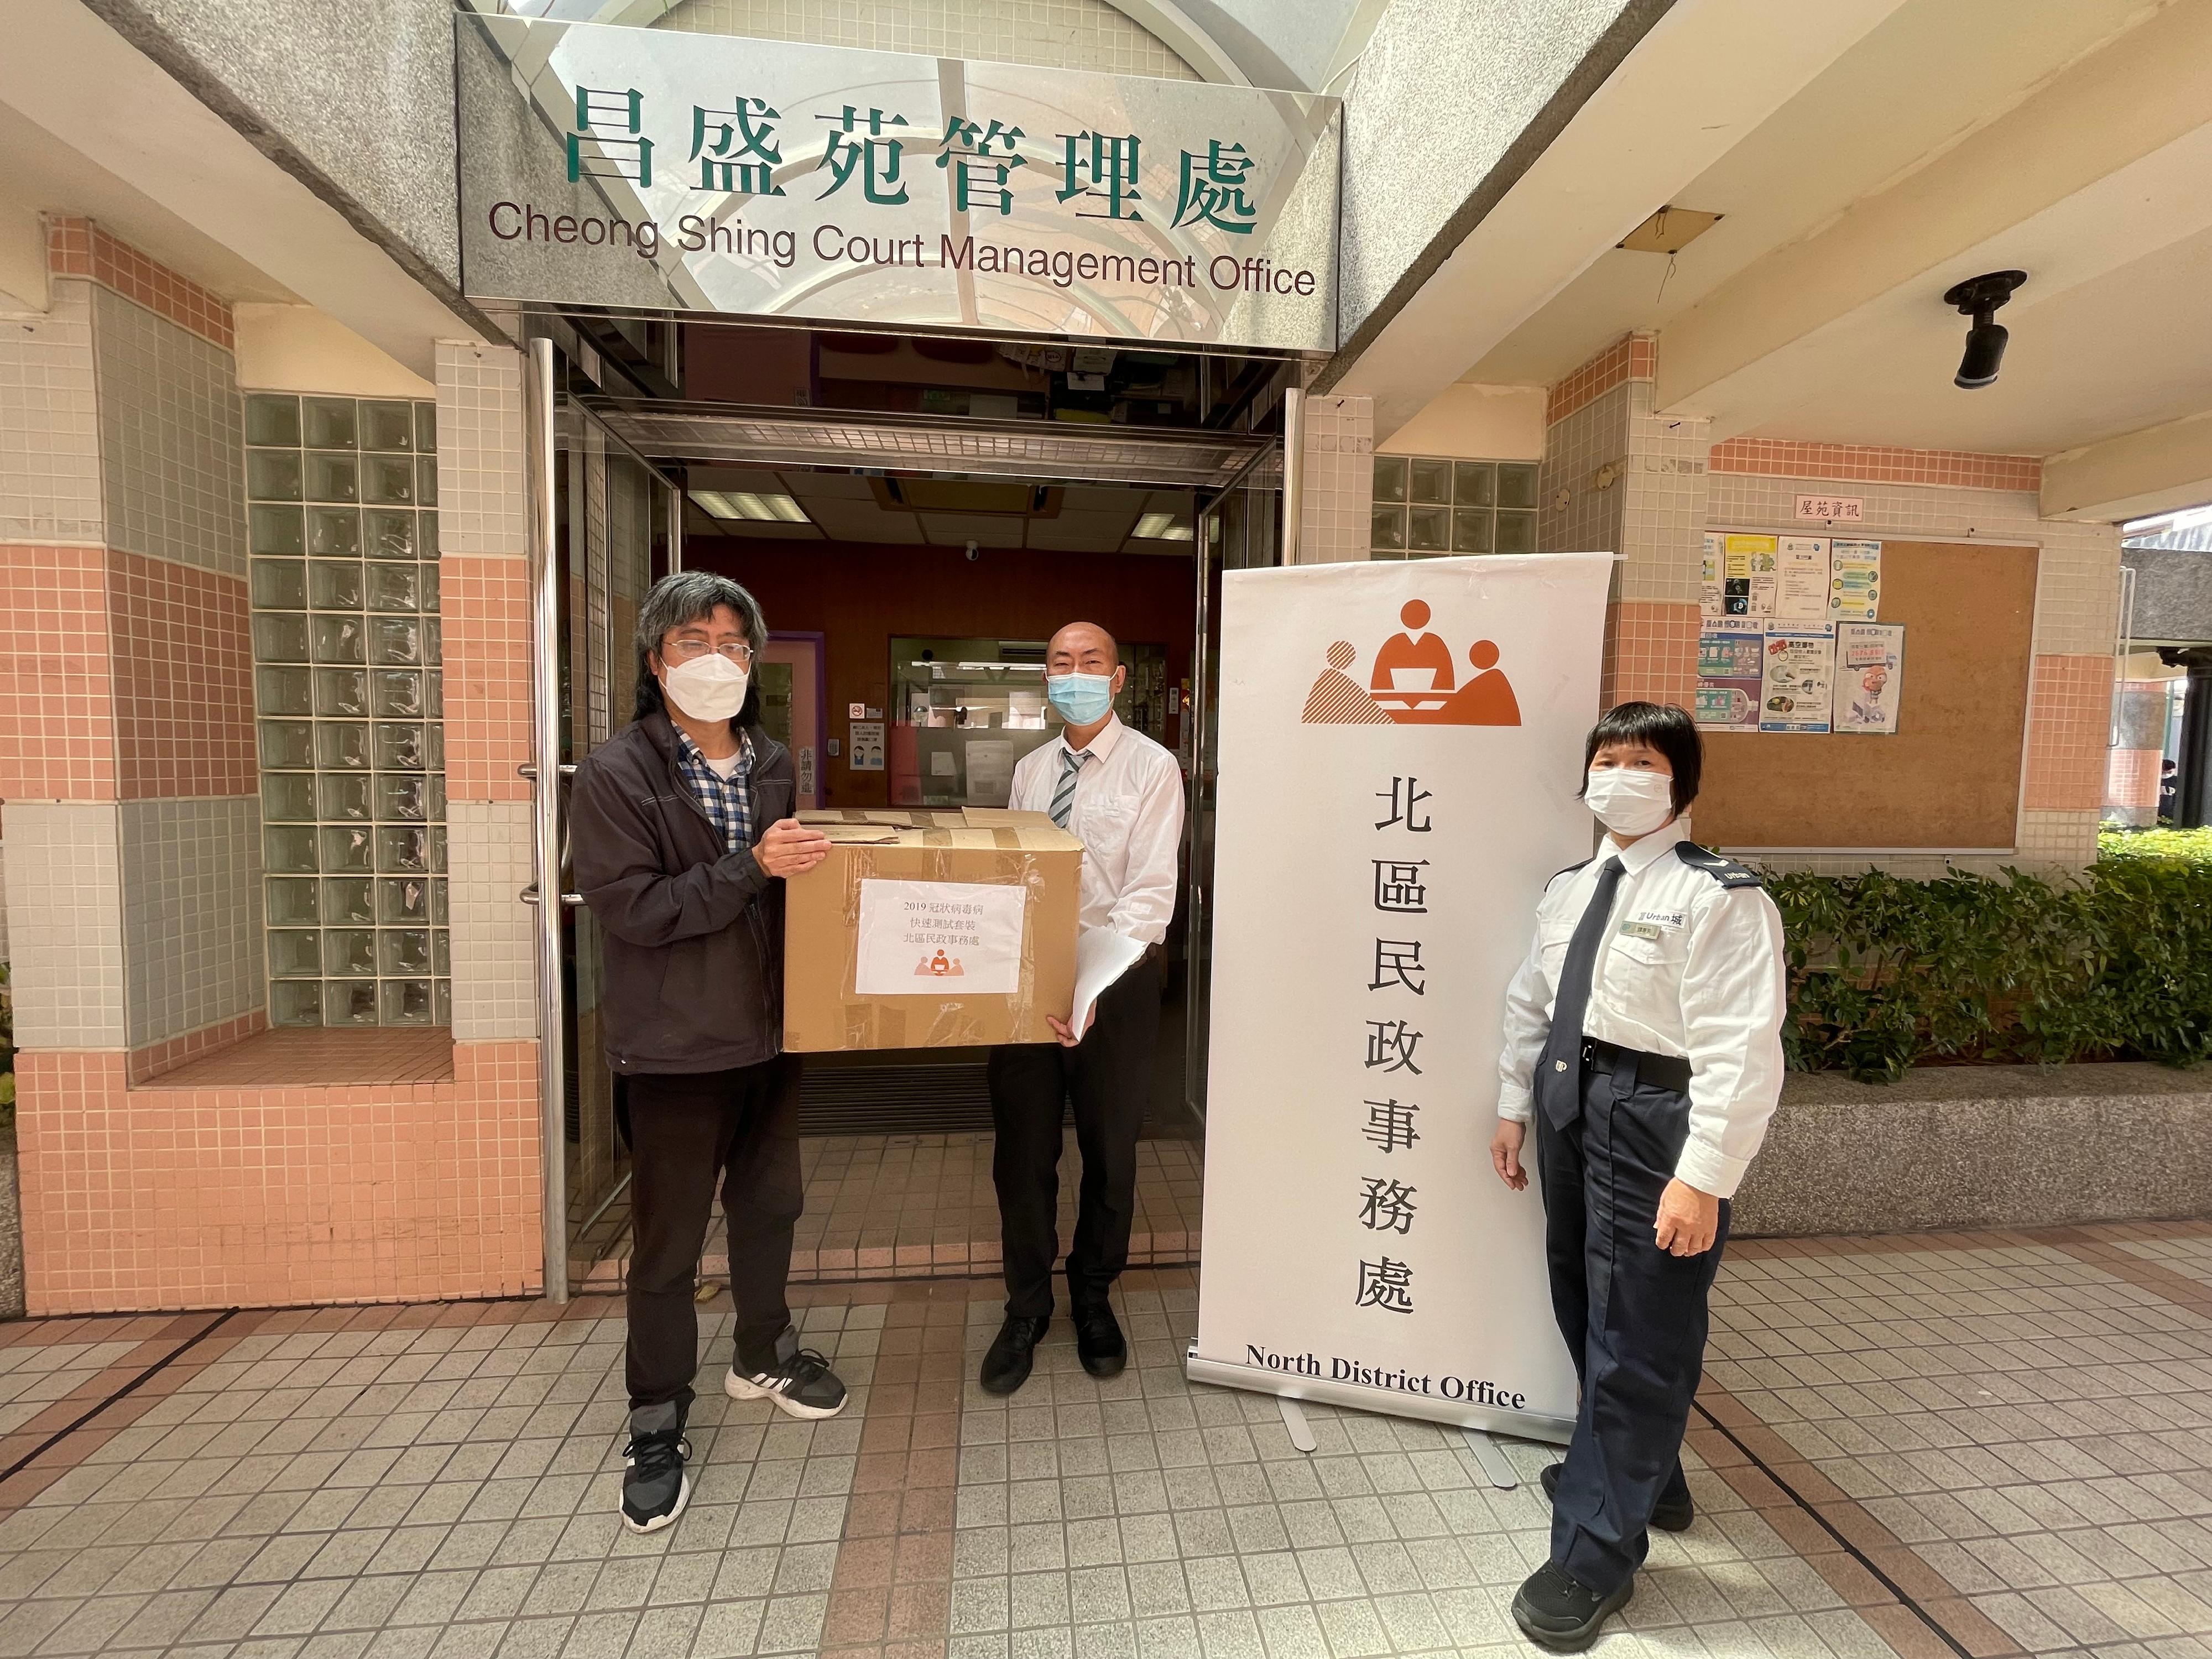 The North District Office today (February 28) distributed COVID-19 rapid test kits to households, cleansing workers and property management staff living and working in Cheong Shing Court in Fanling for voluntary testing through the property management company.